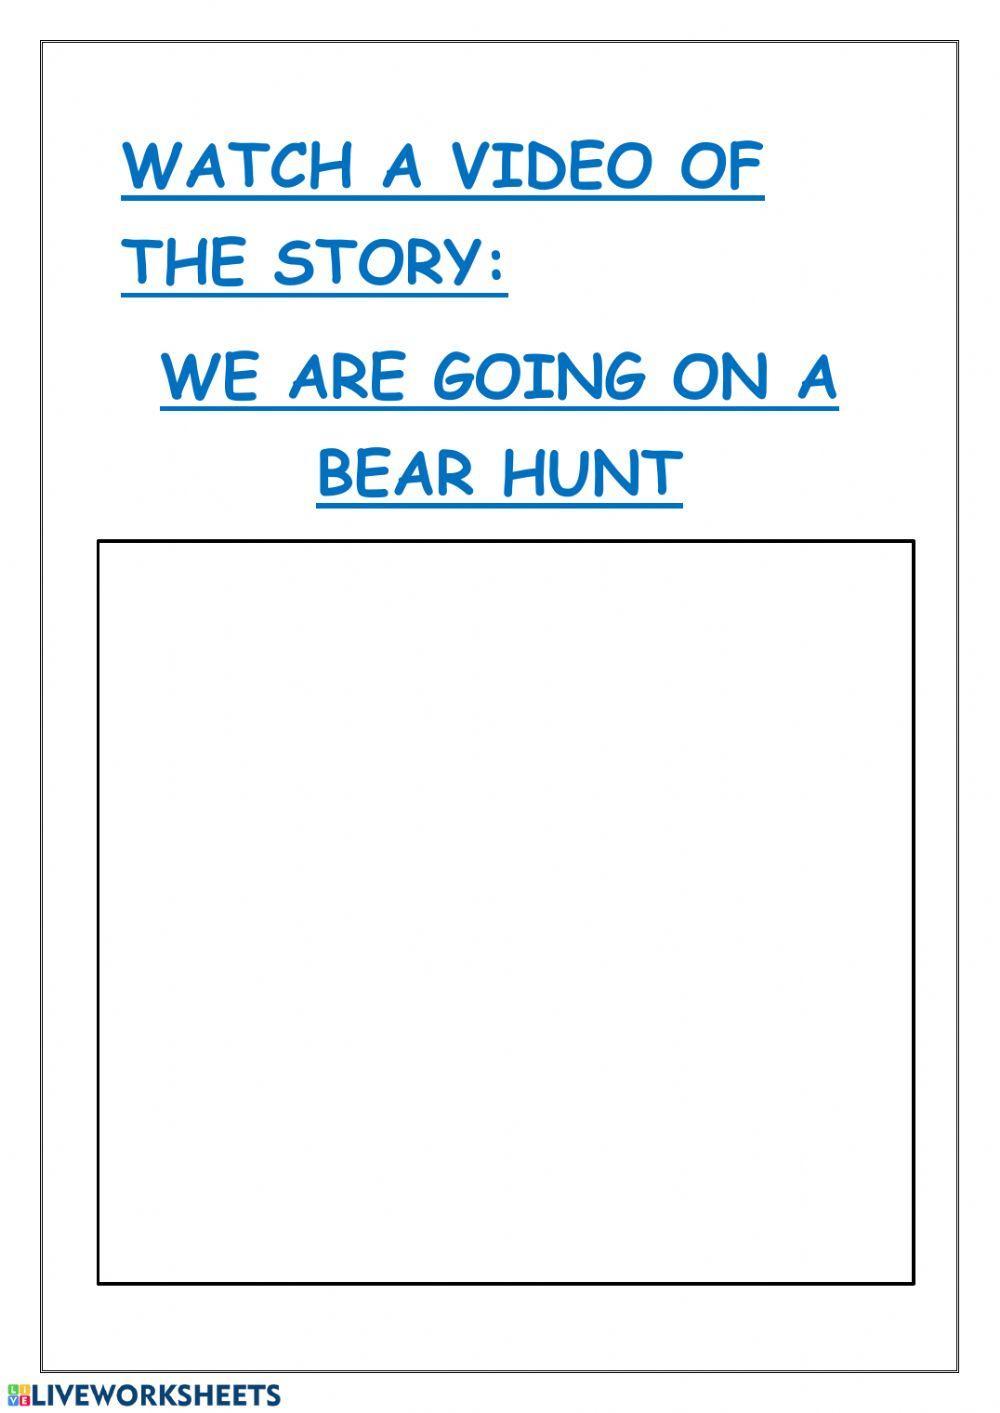 We are going on a bear hunt 